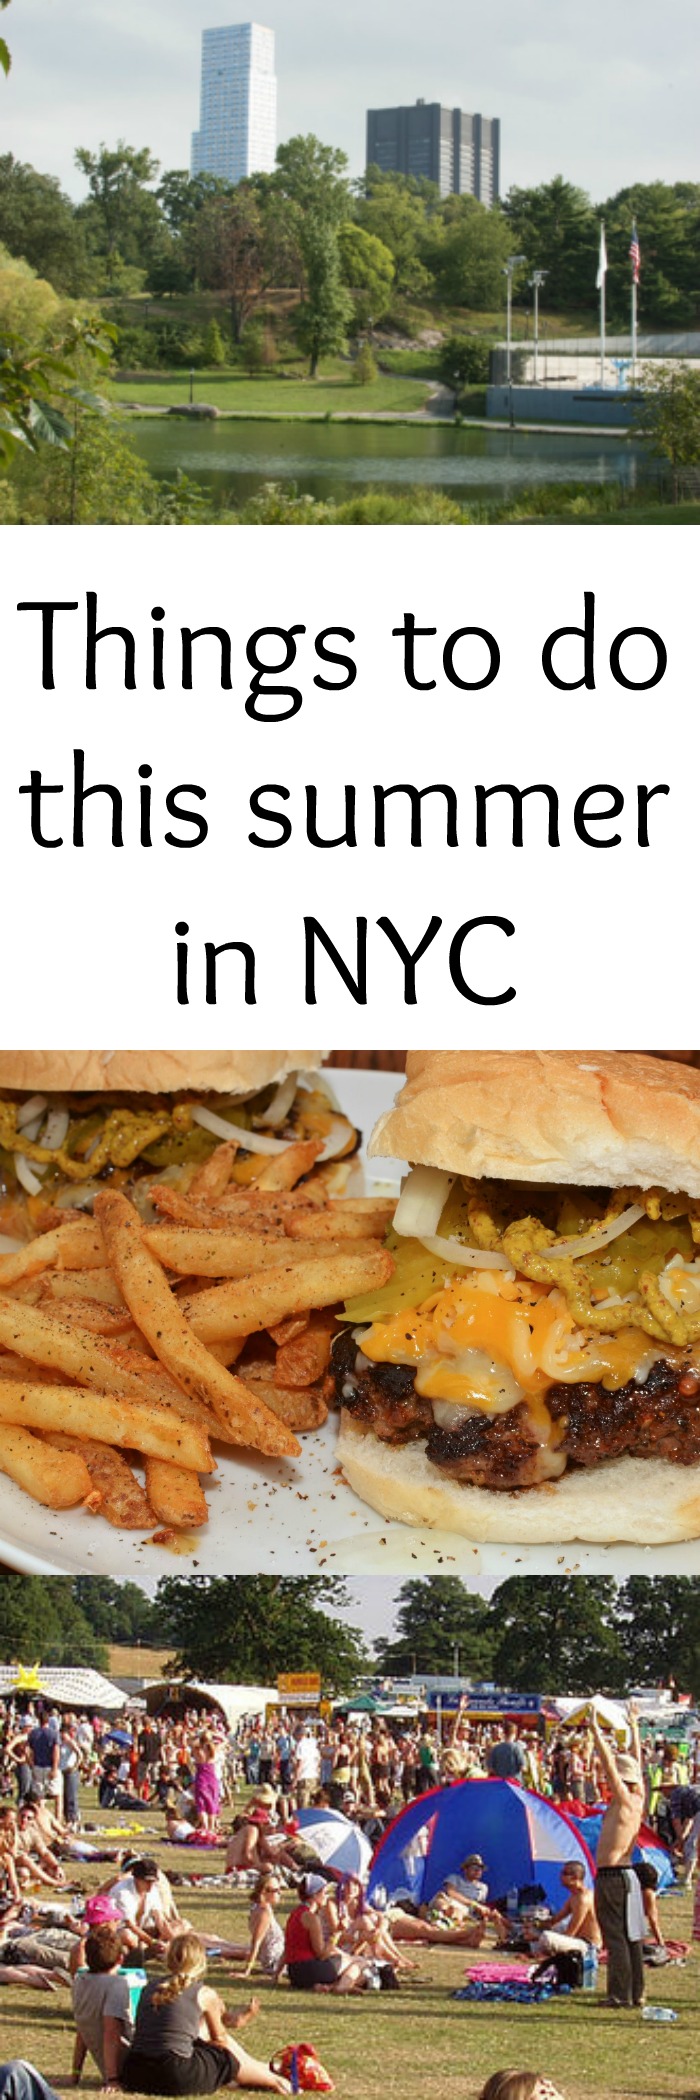 Heading to New York city this summer? Wondering what to do? Here are some Things to do this summer in NYC that are not the normal.